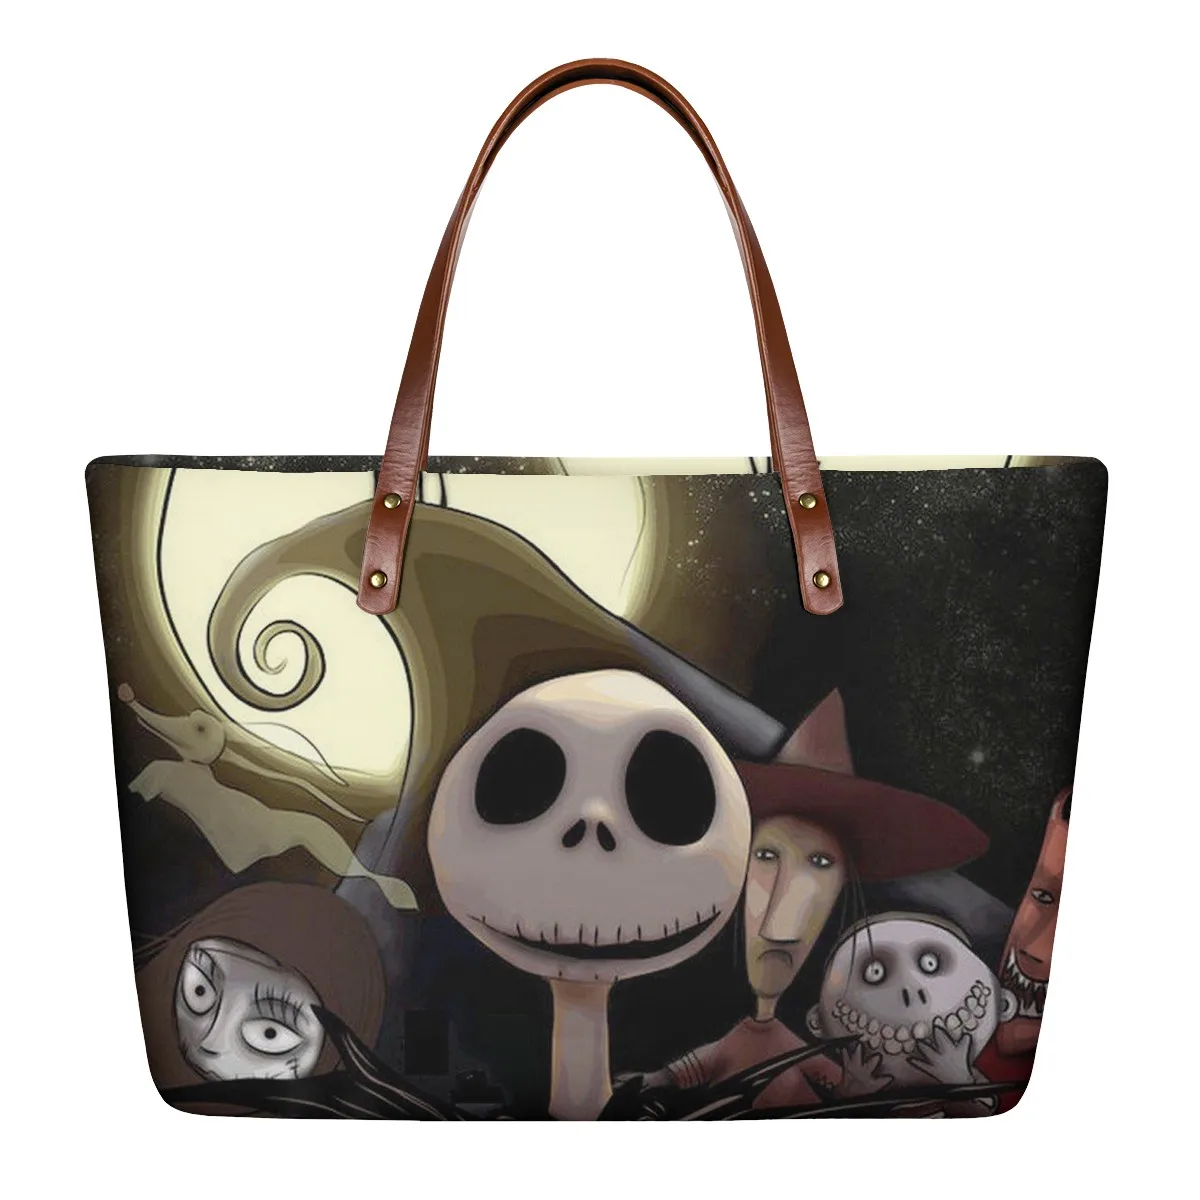 

Factory customized Halloween collective blessing style girl walle tsand handbag store clothes use customized bags as shopping ba, Print picture